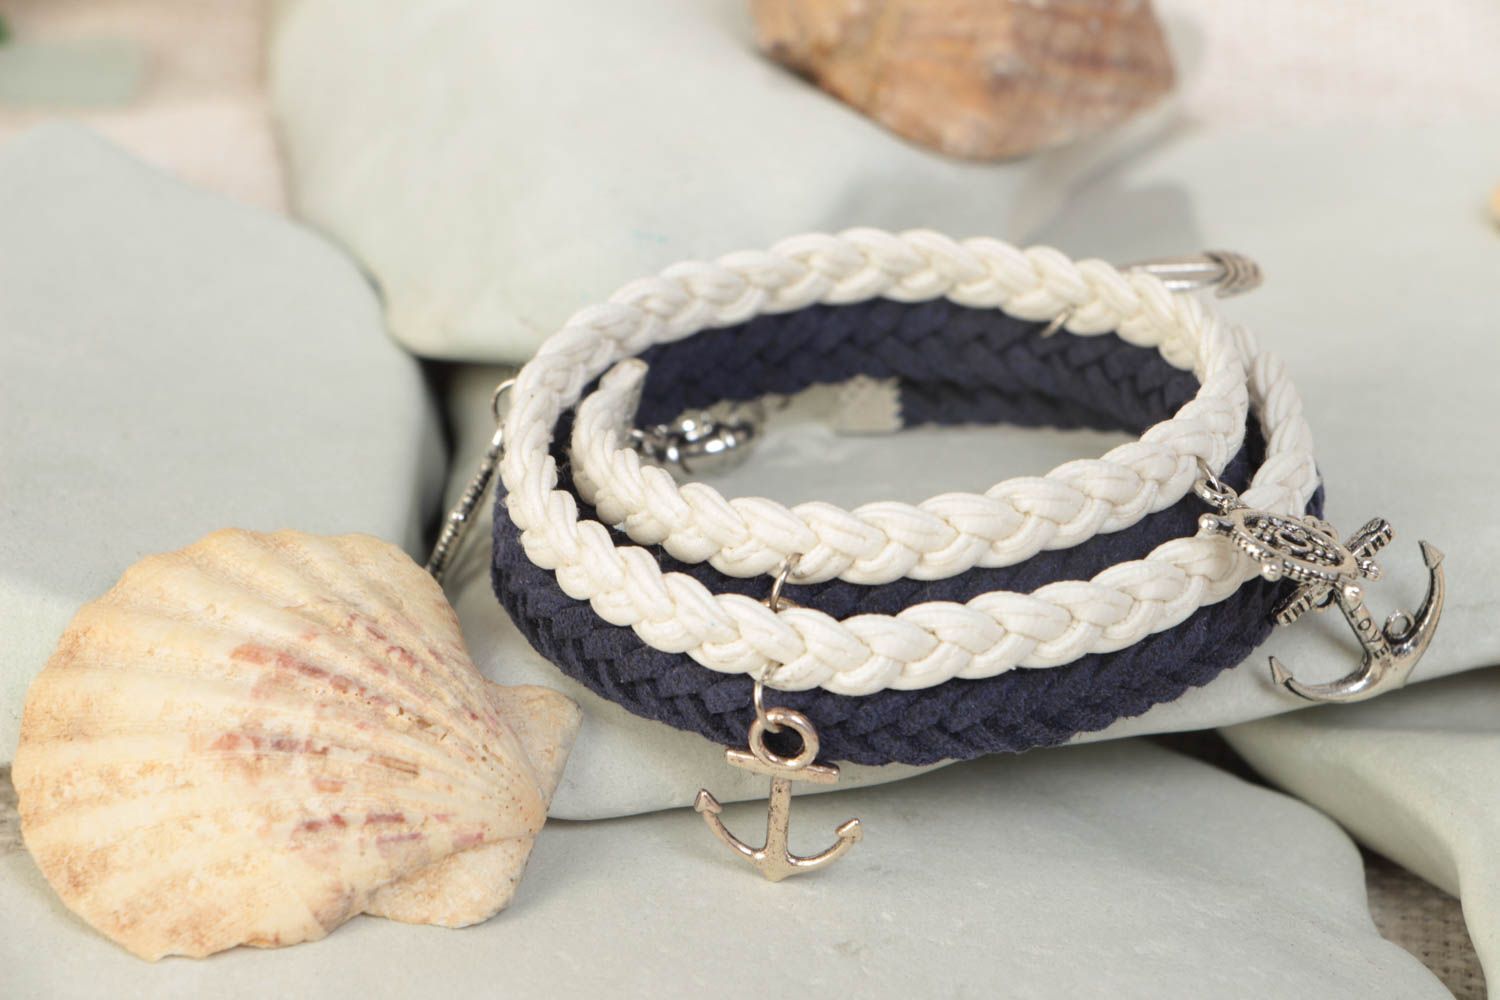 Handmade multi row wrist bracelet woven of suede cord in marine style with charm photo 1